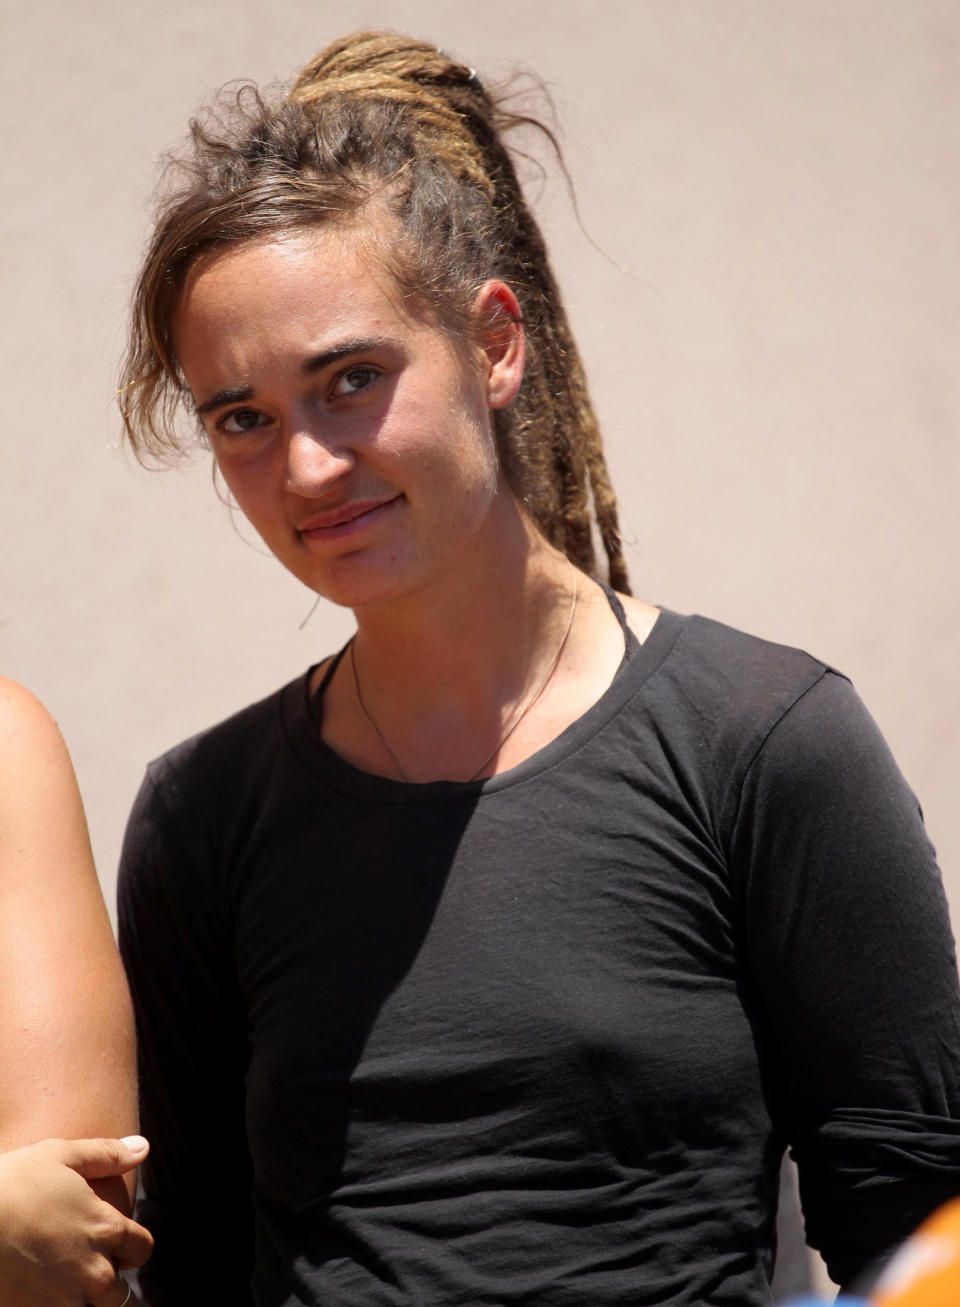 Sea-Watch3 German captain Carola Rackete leaves after being questioned in court in the southern Sicilian town of Agrigento, Italy, Thursday, July 18, 2019. Rackete, who forced a government block docking at an Italian port after rescuing migrants, faces questioning by Italian prosecutors over allegedly aiding illegal immigration. (Pasquale Claudio Montana Lampo/ANSA via AP)